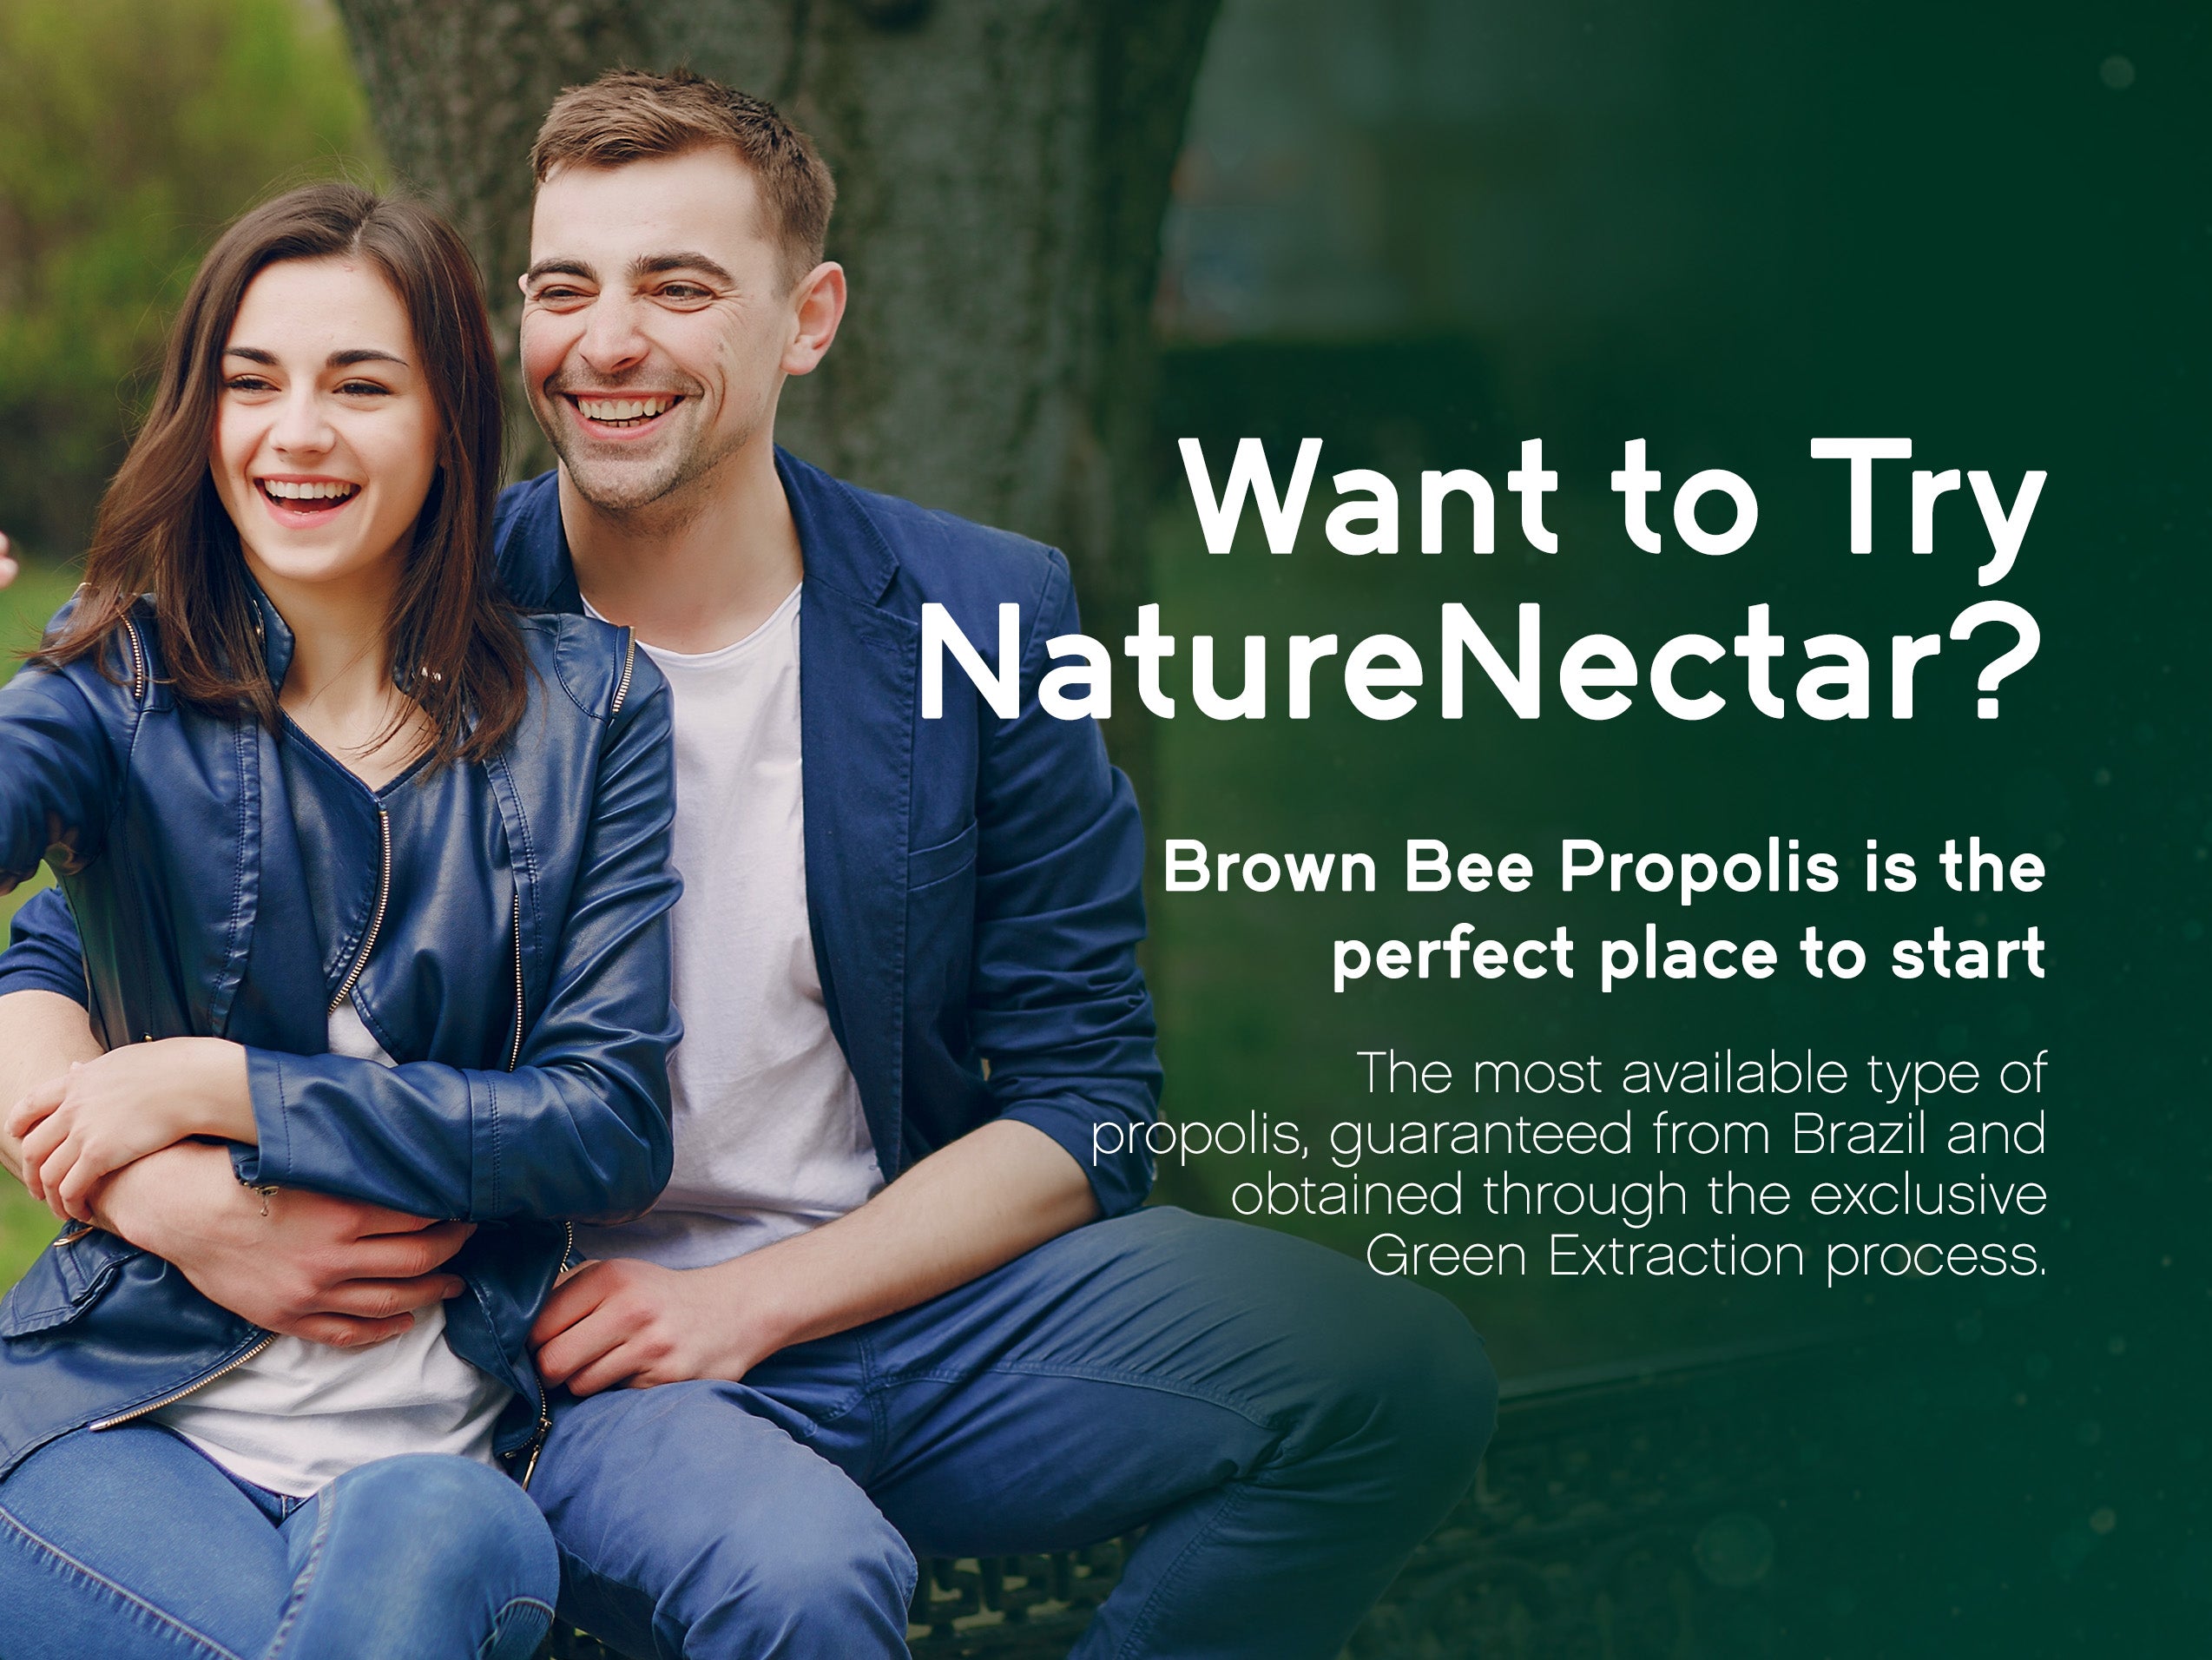 WE HAVE MANY CHOICES. BROWN BEE PROPOLIS IS A GREAT START